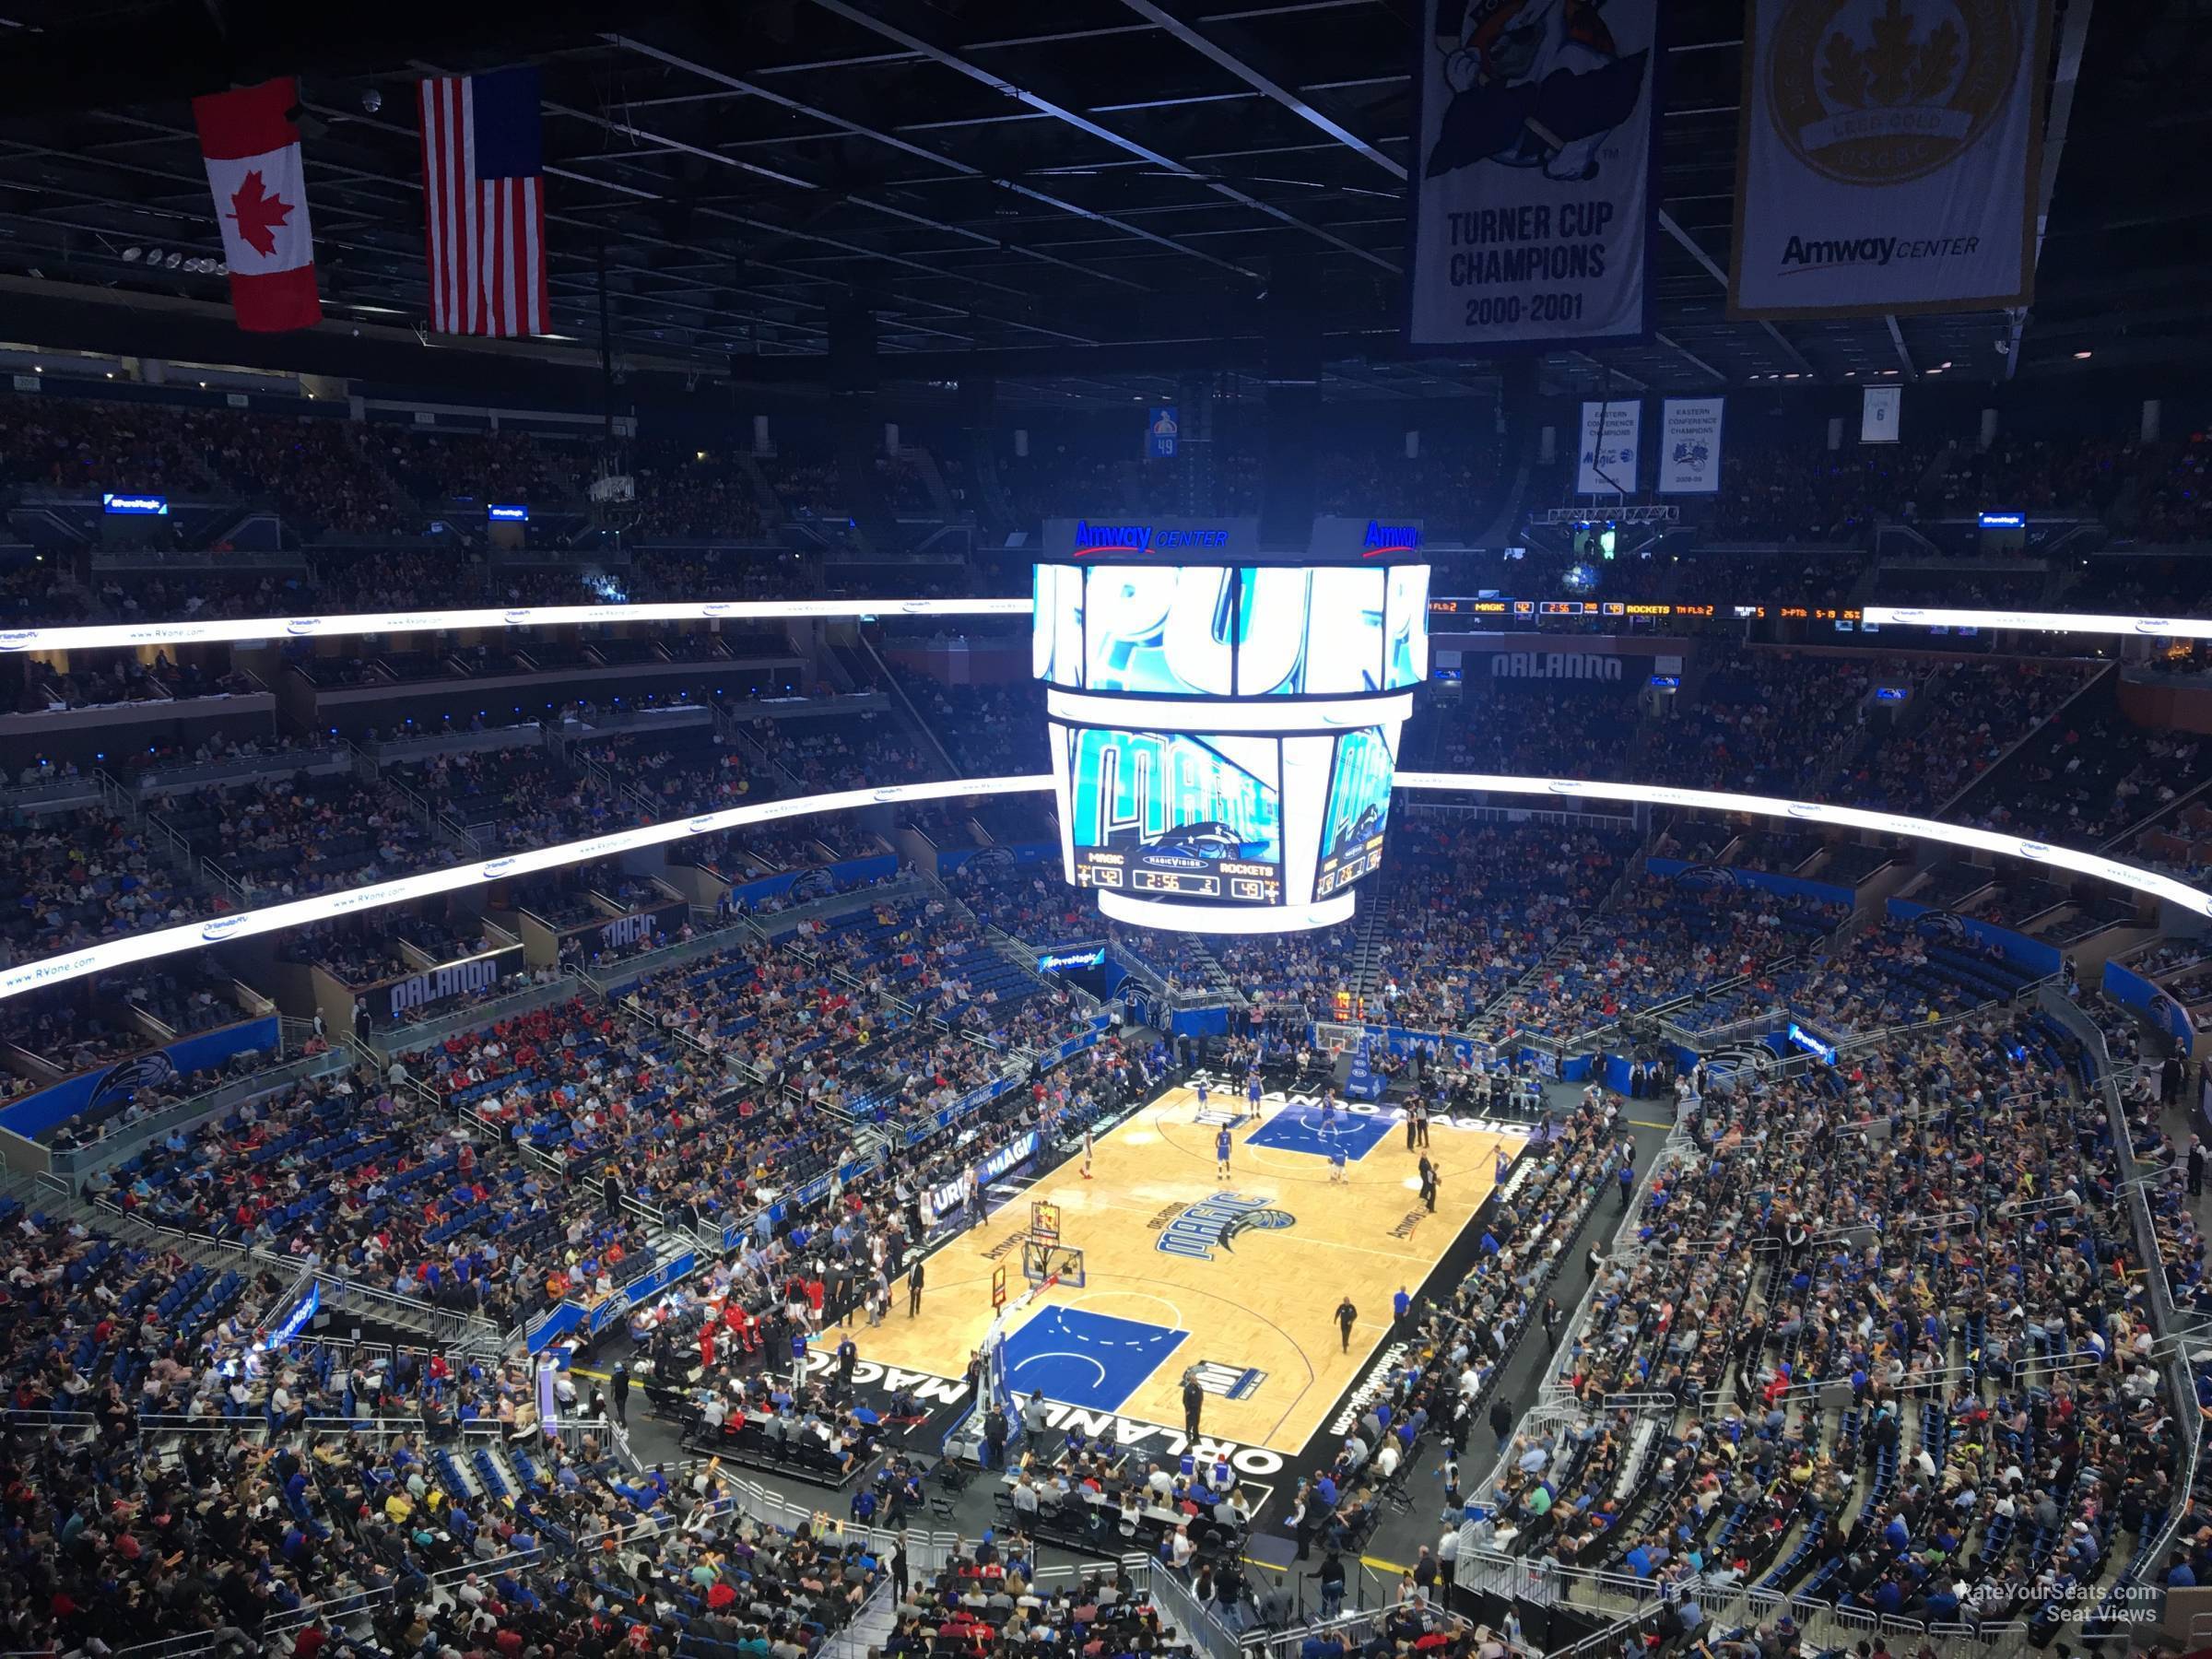 section 231, row 5 seat view  for basketball - amway center